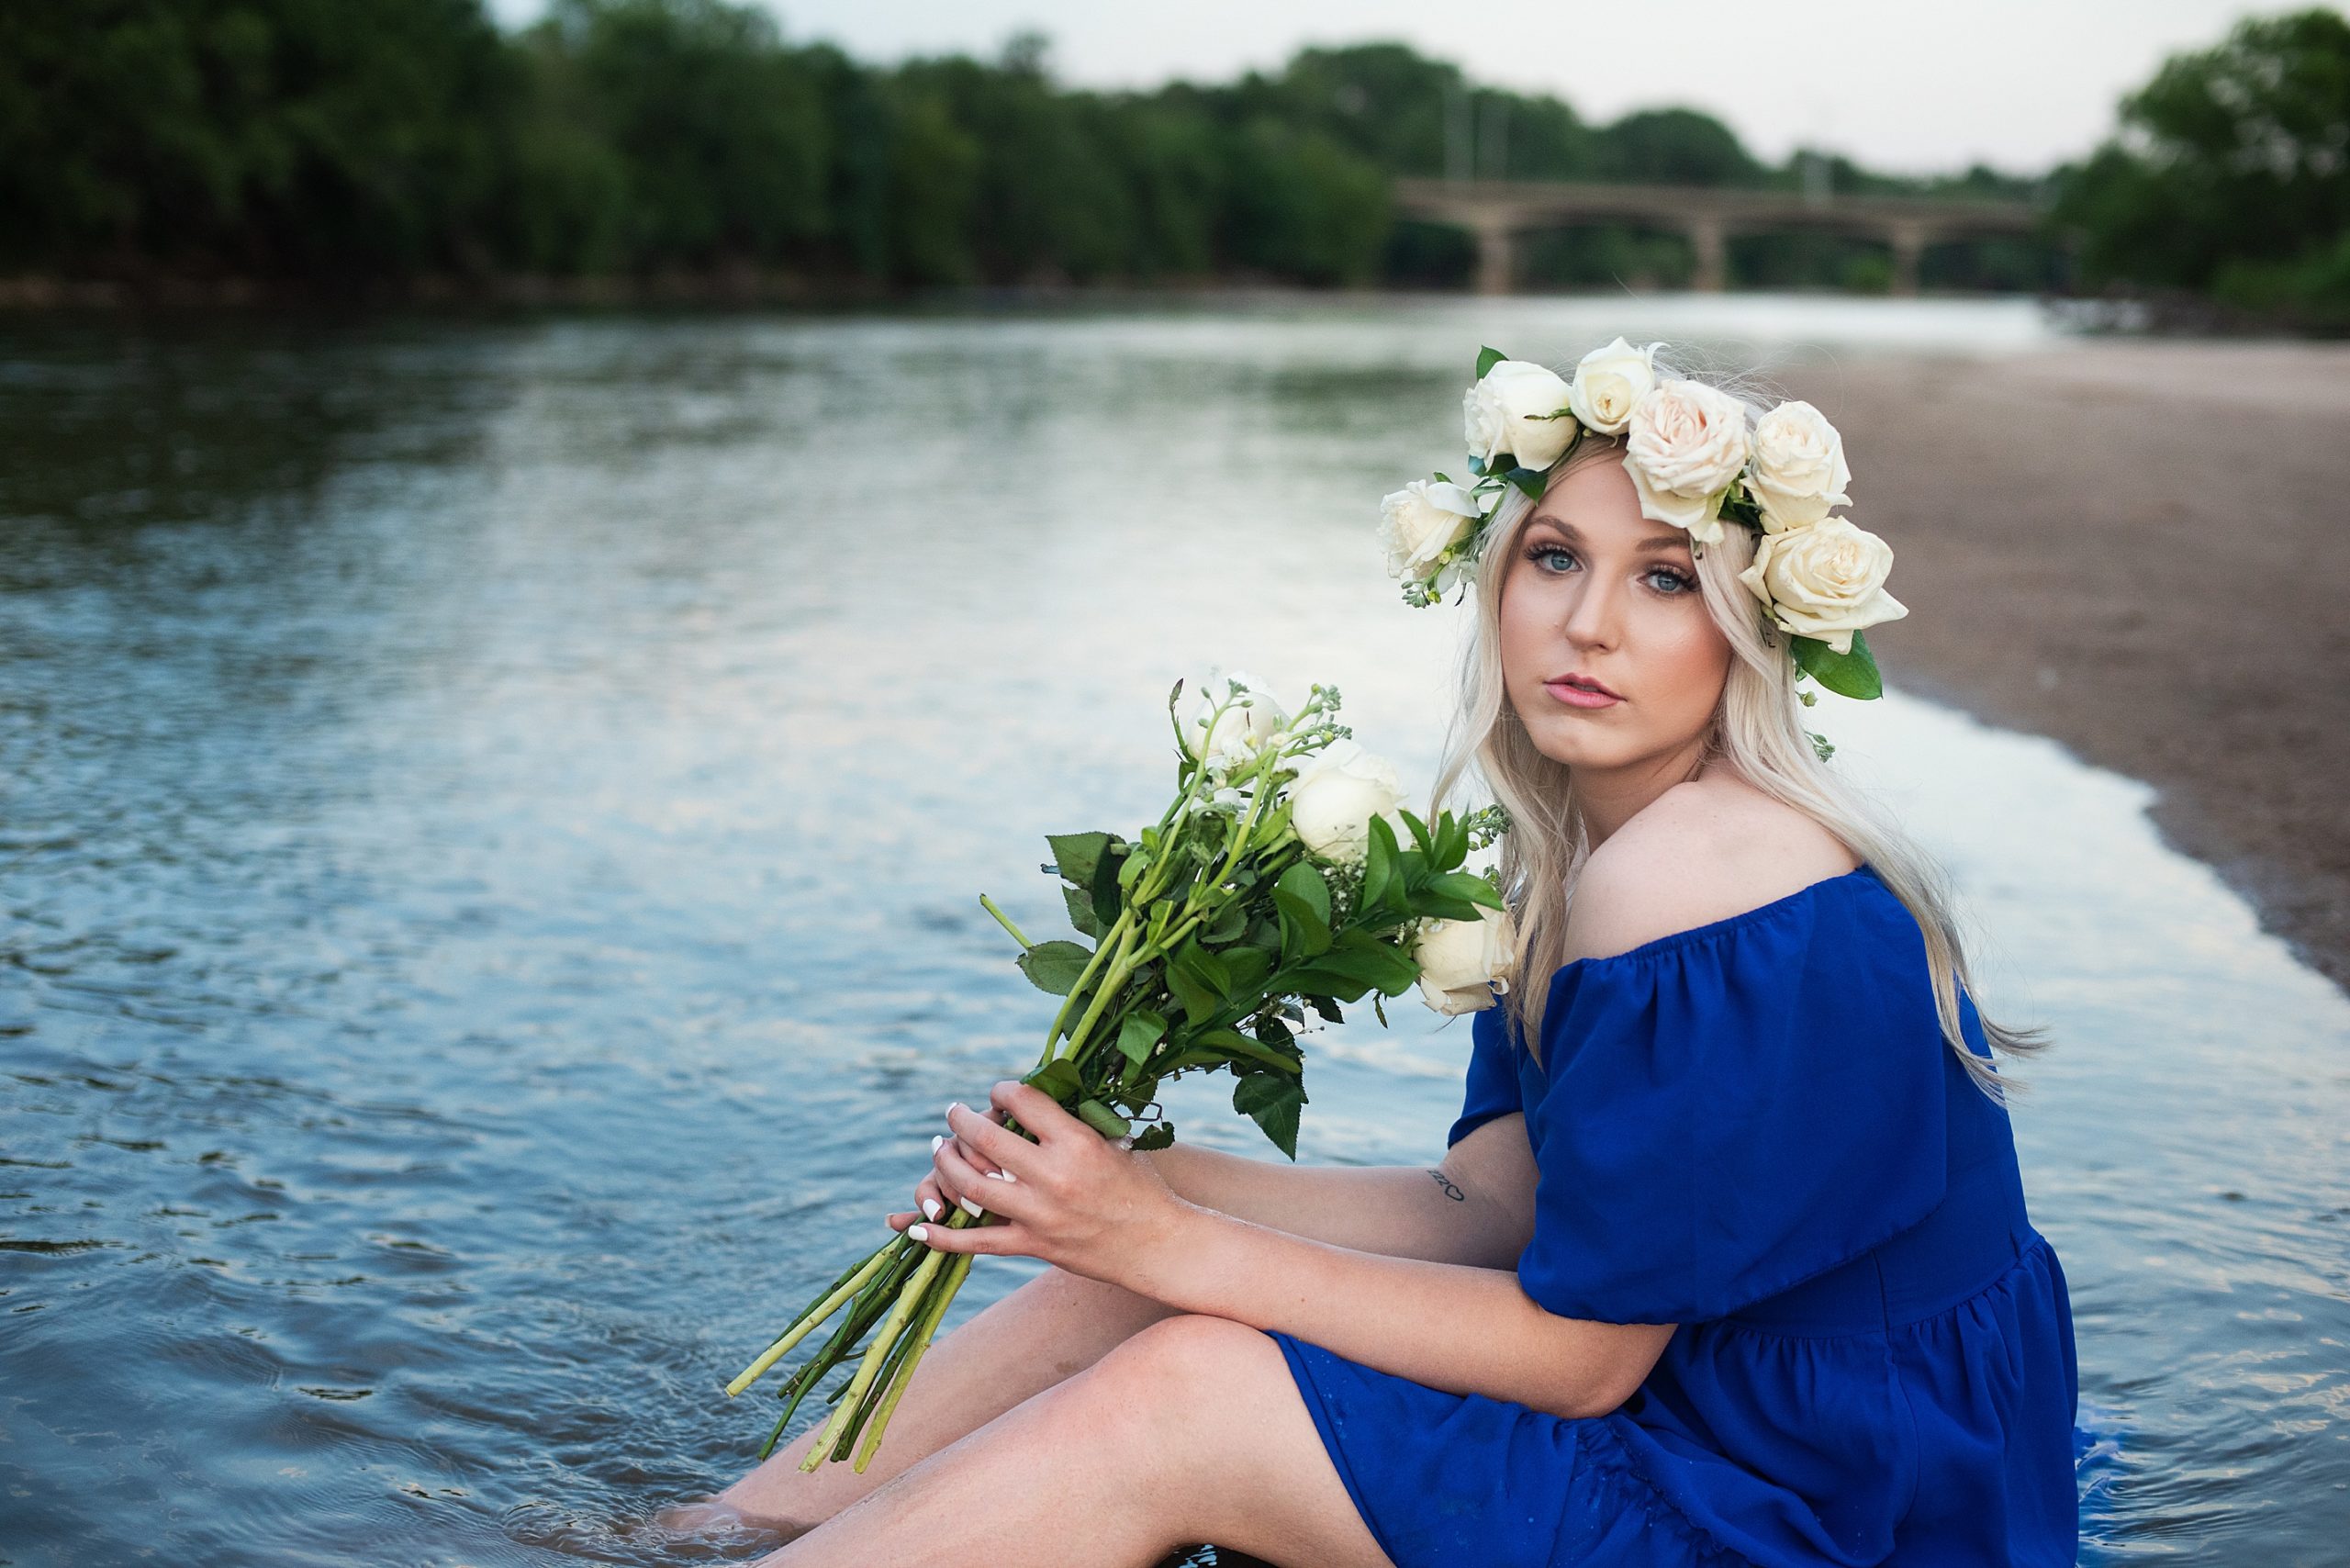 girl in blue dress sitting in water with a floral crown